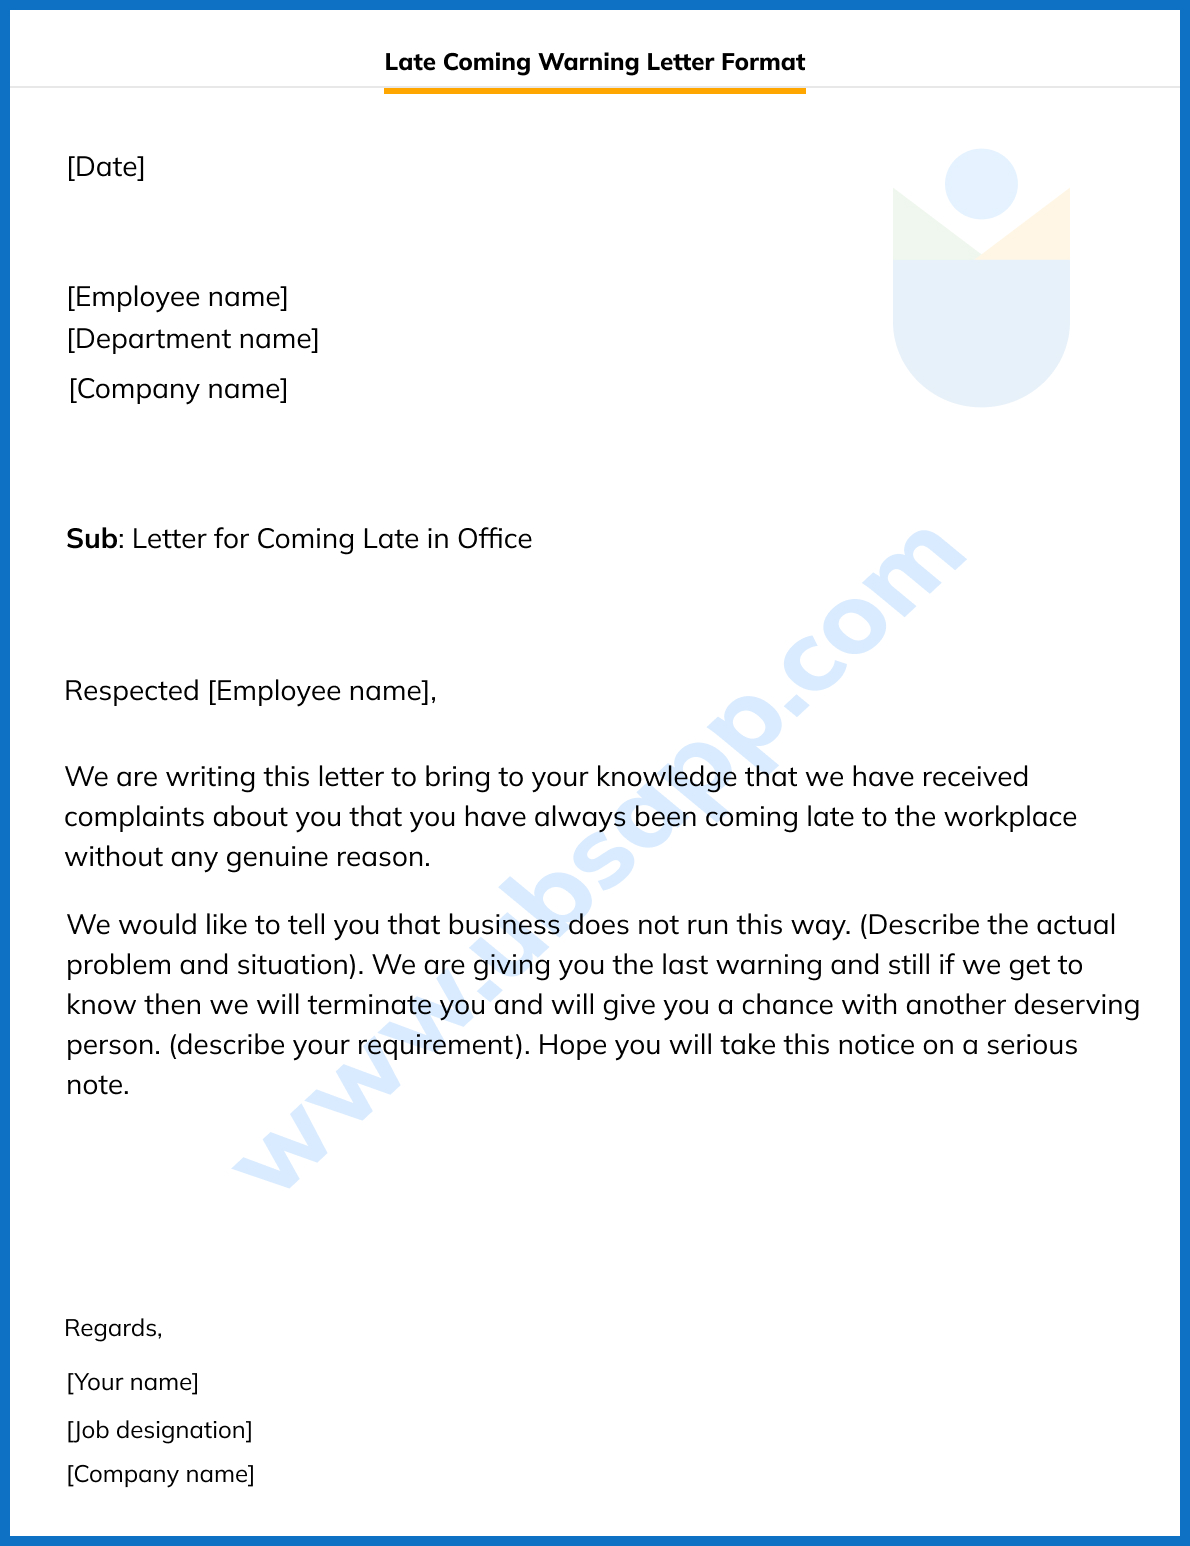 Late Coming Warning Letter Format